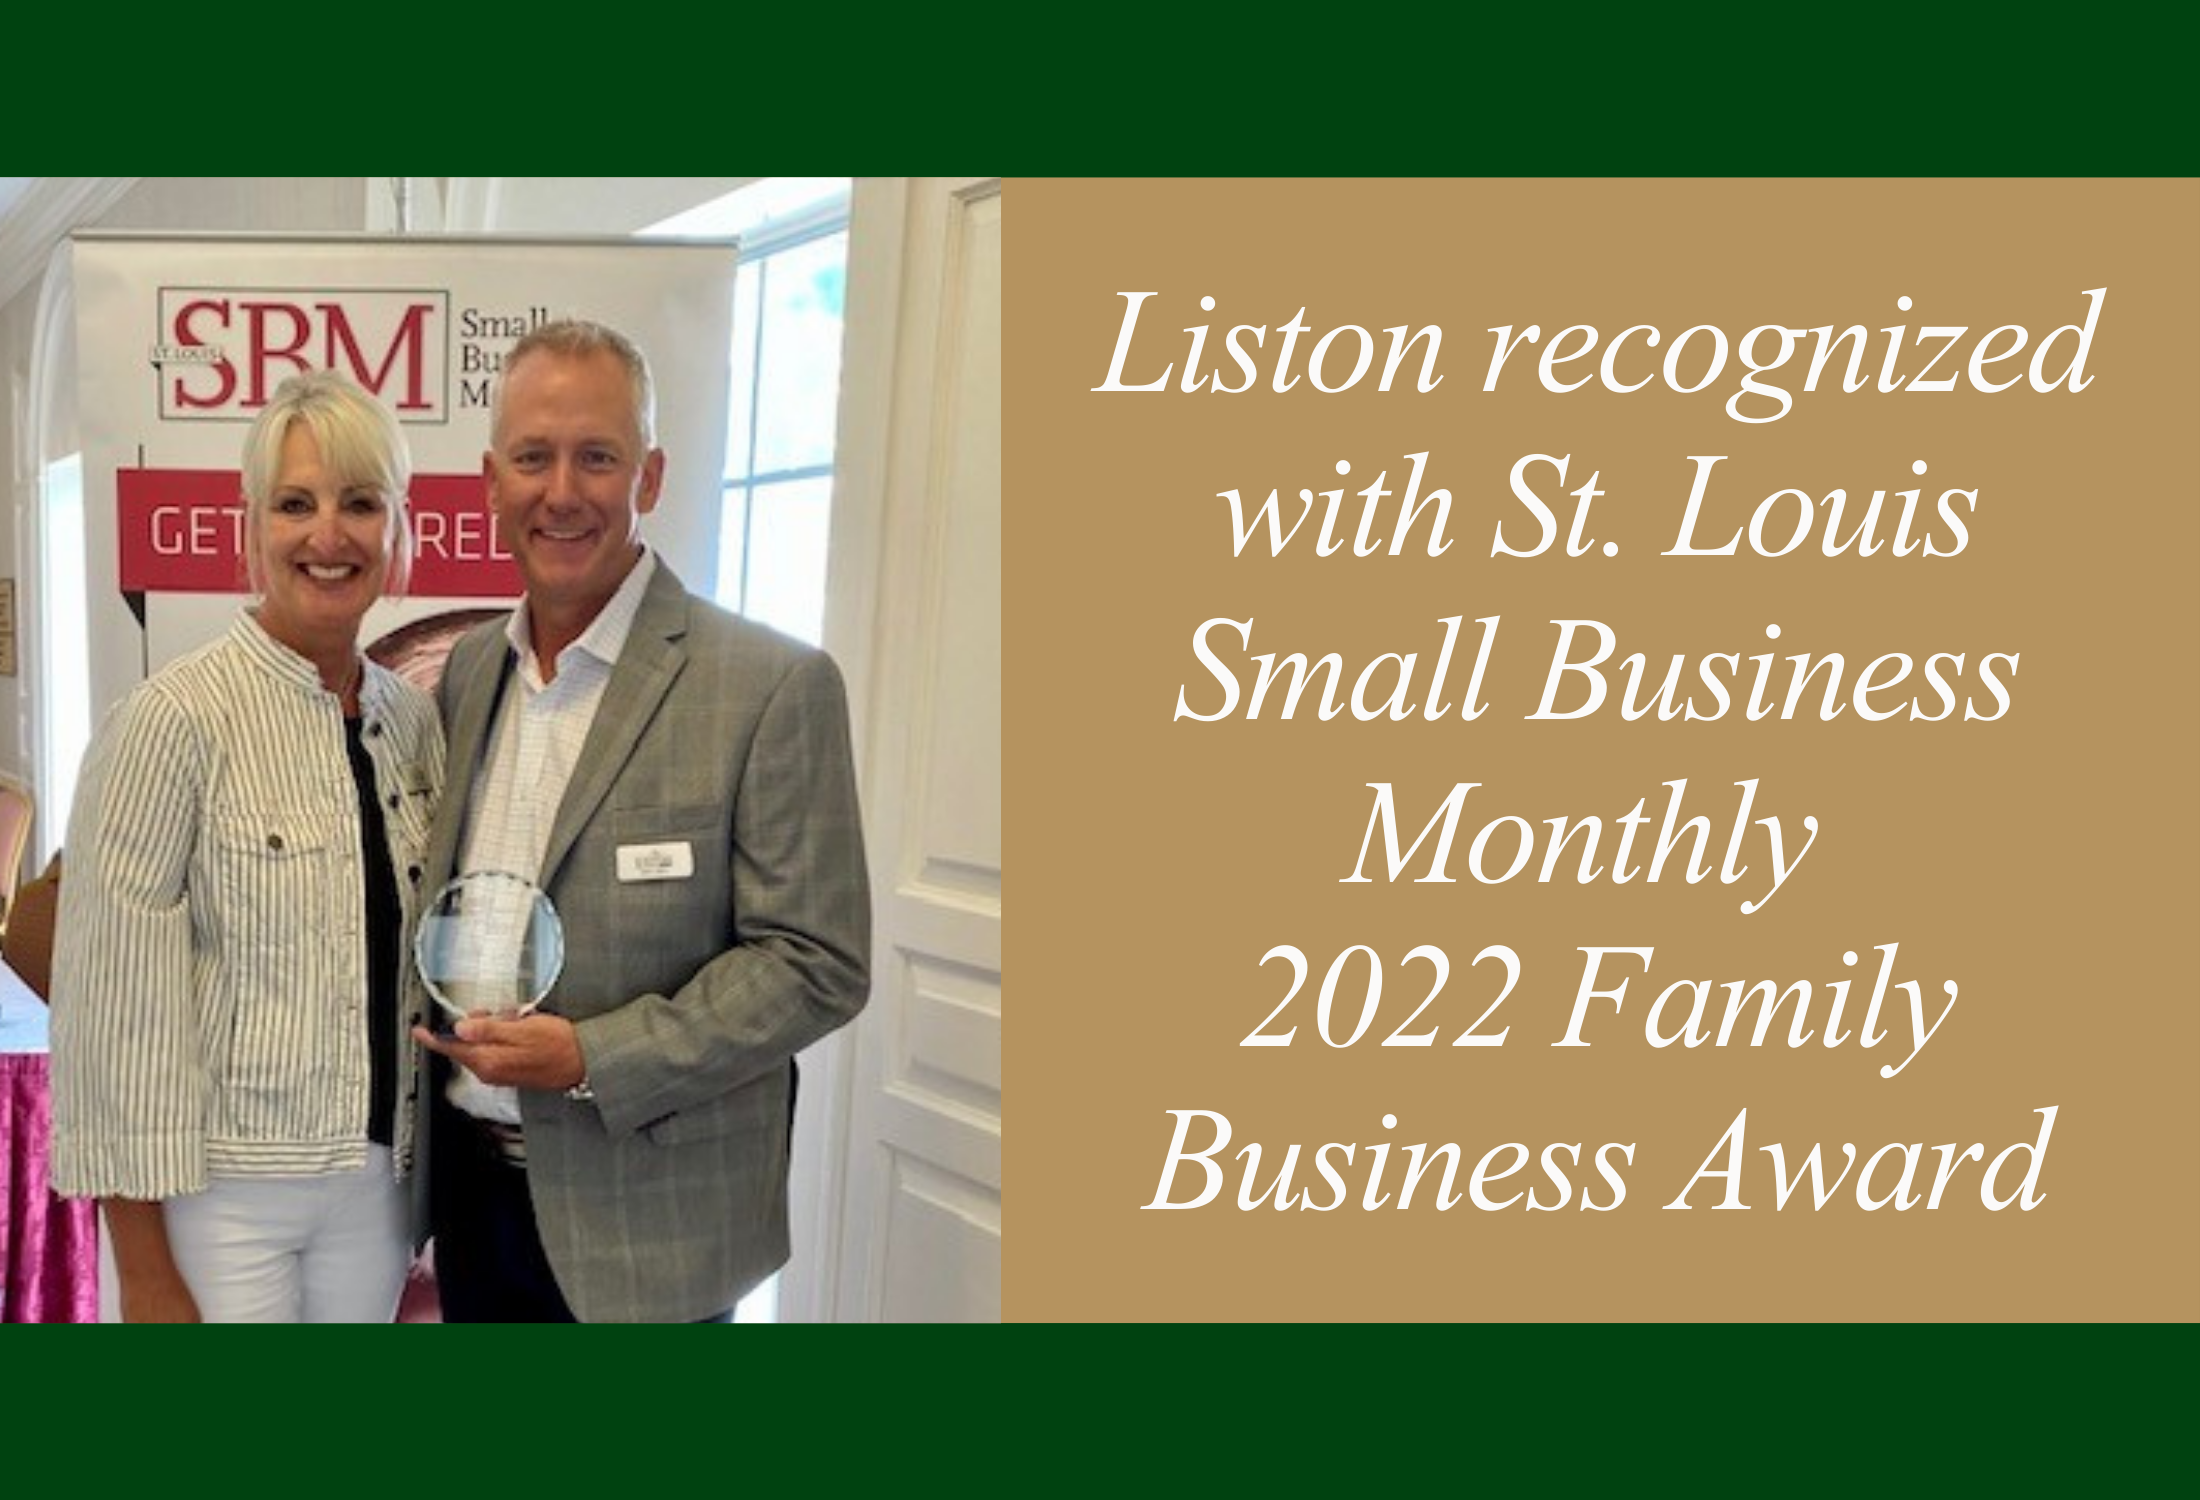 Liston recognized with St. Louis Small Business Monthly 2022 Family Business Award